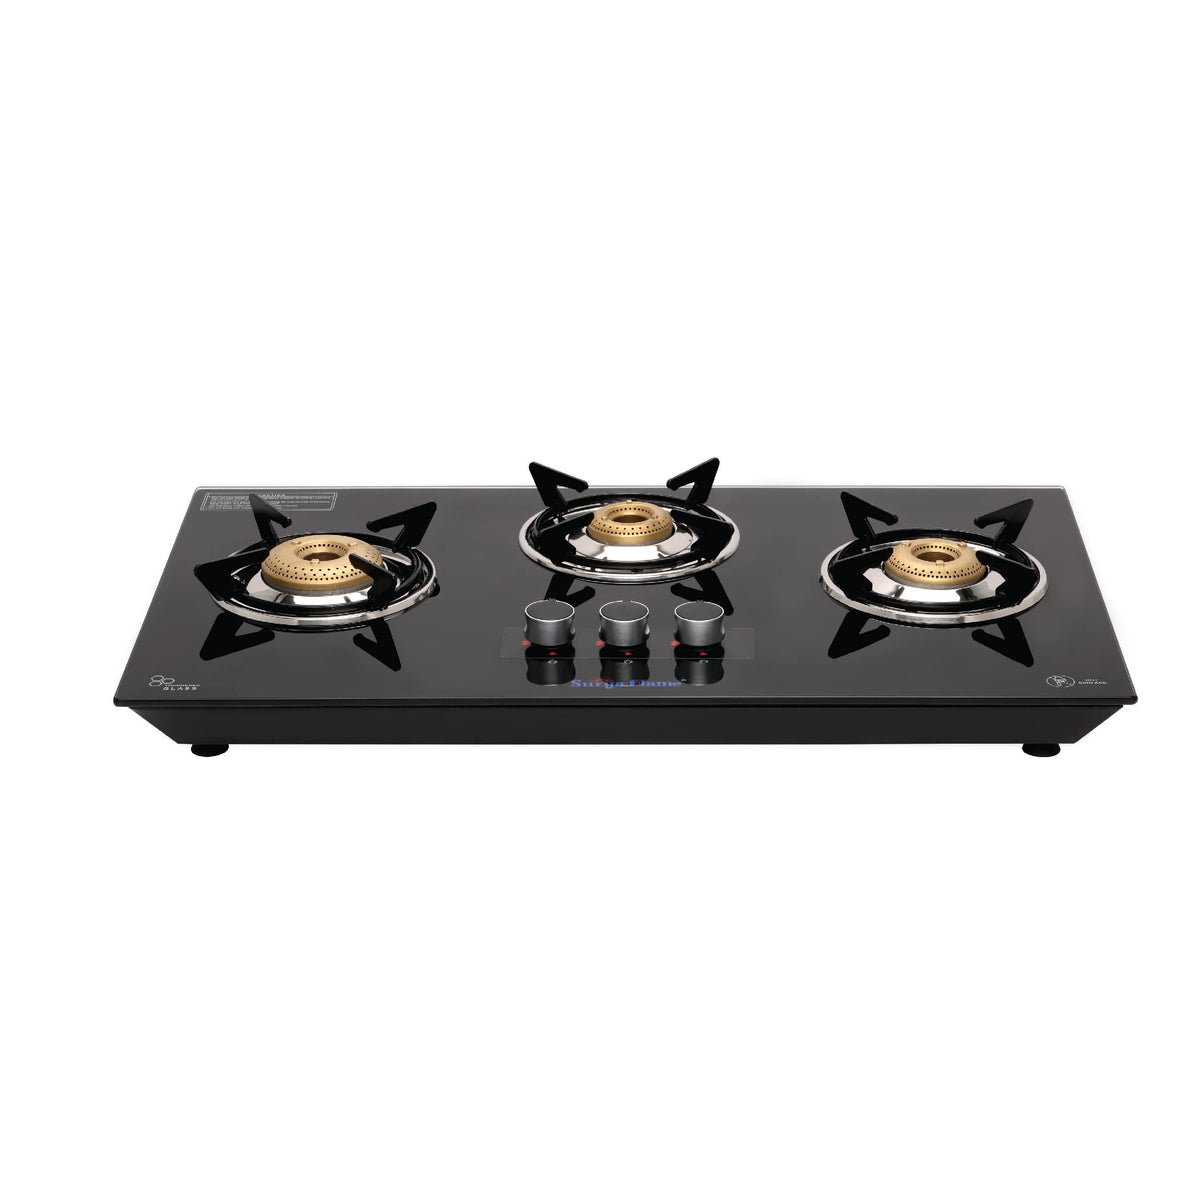 Surya Flame Apollo Round Hob Top | Gas Stove 3 Burners | Manual Glass Stove with Spill Proof Desing & Jumbo Burner | 2 Years Complete Doorstep Warranty - Black (3B APOLLO ROUND)